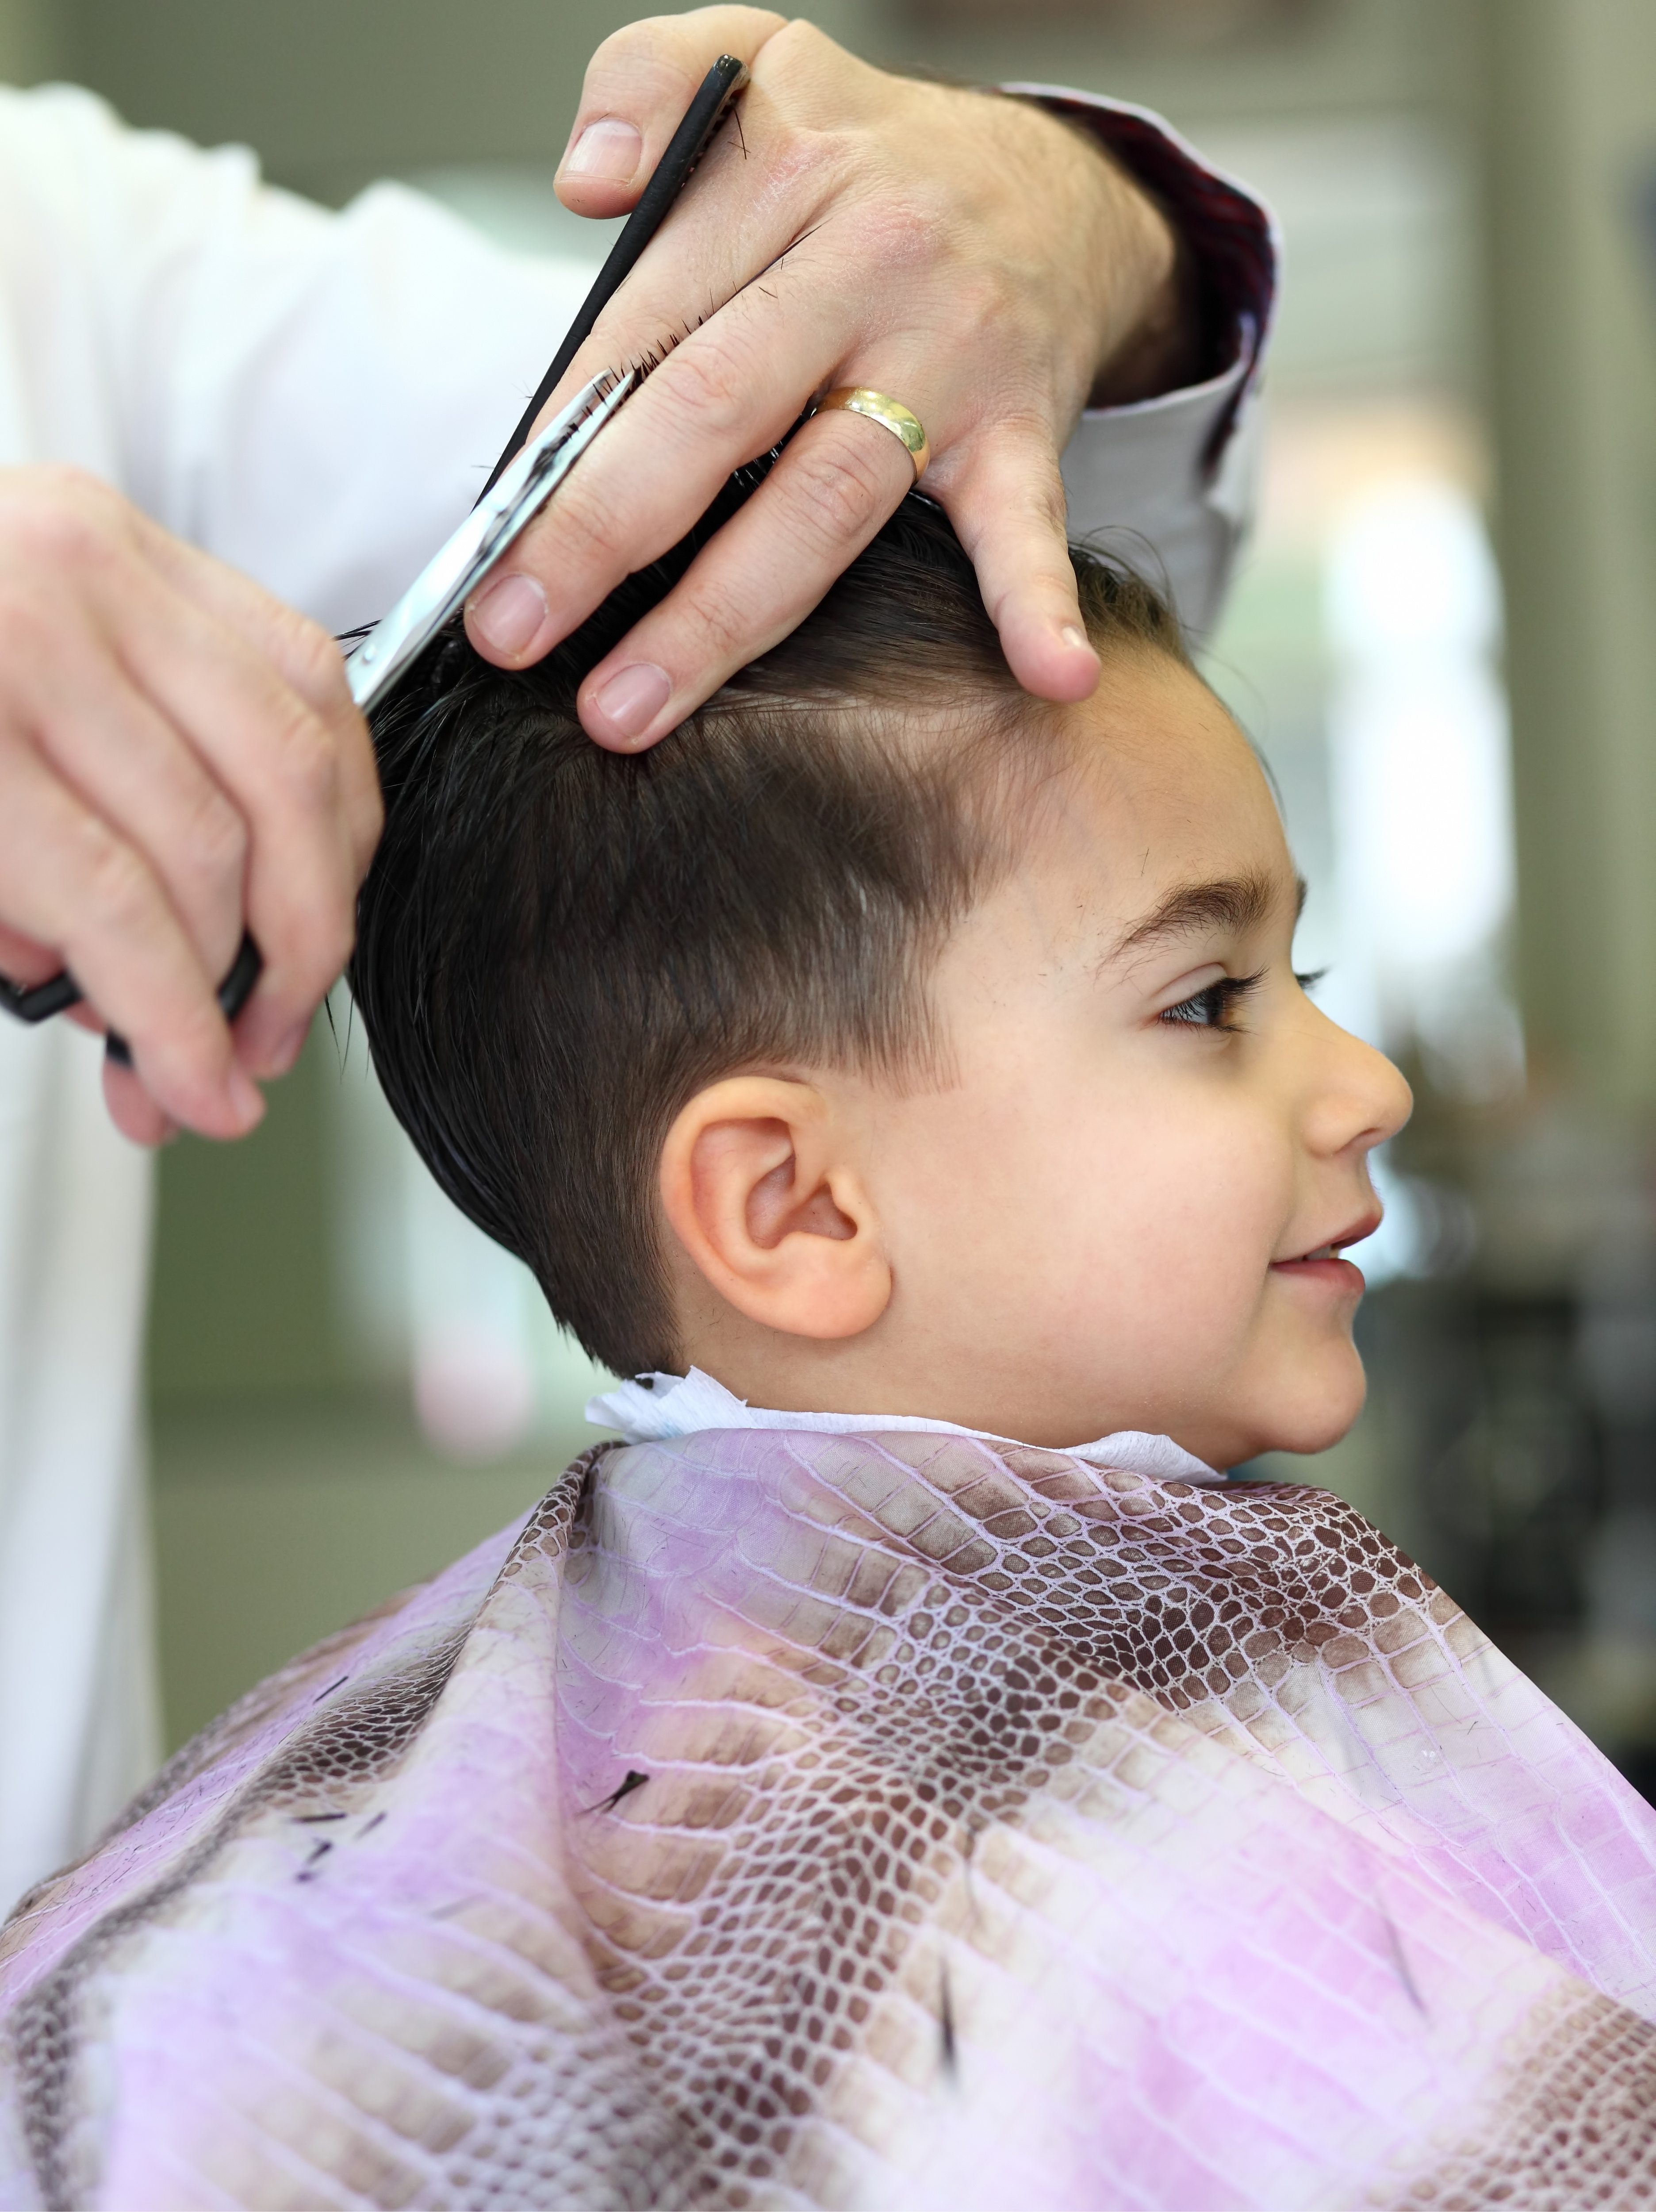 A little boy getting a kids haircut in Miller Place, NY from Lemon Tree Miller Place.